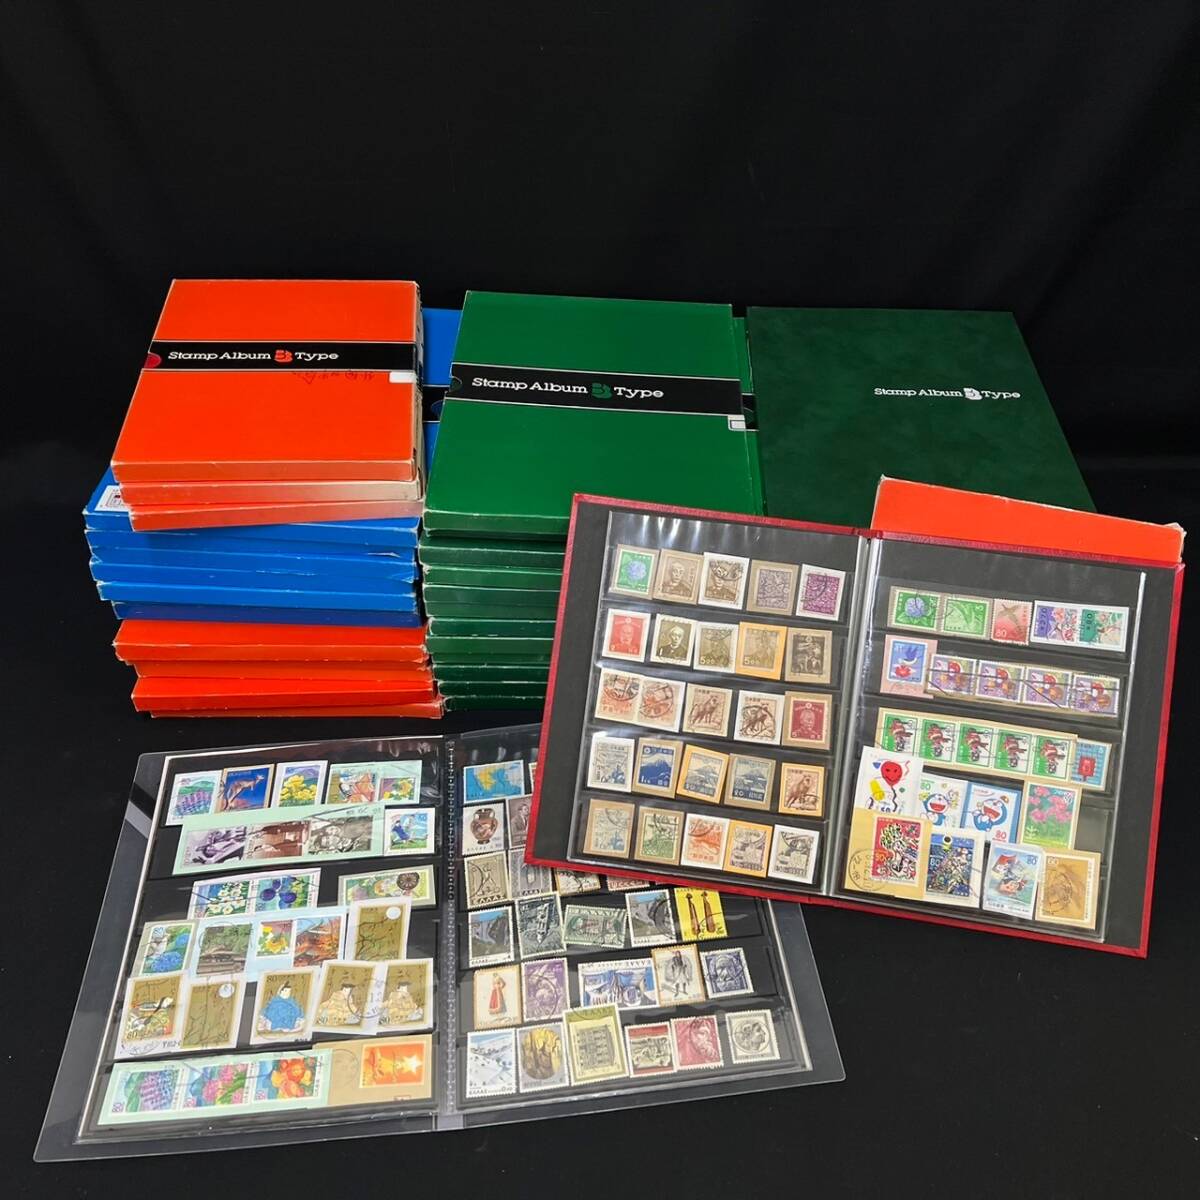 BDg220I 120 used domestic abroad contains stamp album large amount summarize te-ji-B Type SB-30 40 pcs. approximately 19kg Japan stamp stock book memory foreign 